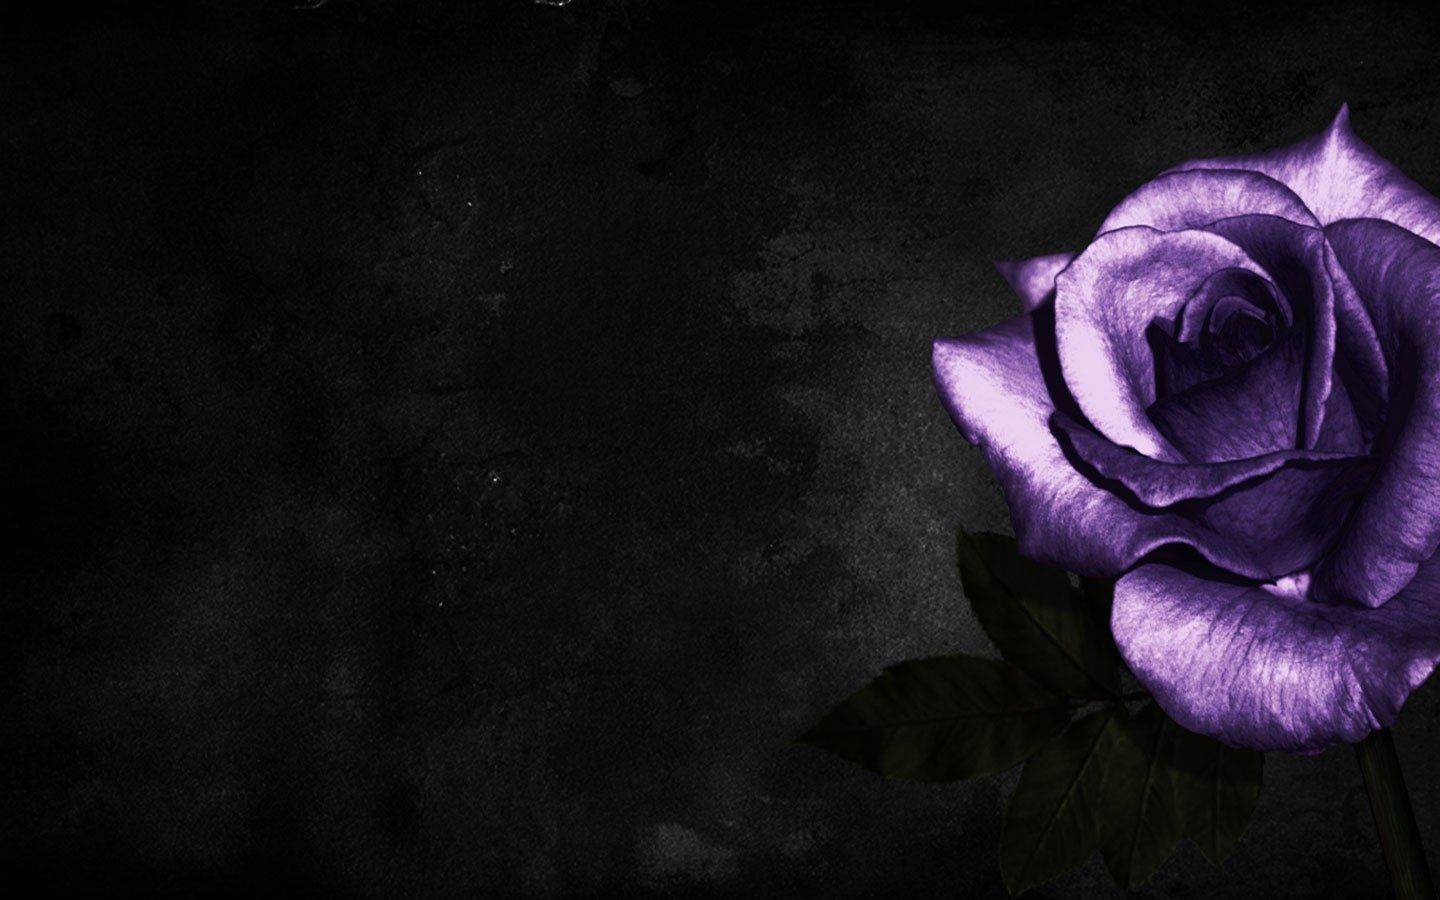 Free Rose Wallpaper 22492 23106 Hd Wallpapers - Special Friend Friend Sorry Messages , HD Wallpaper & Backgrounds